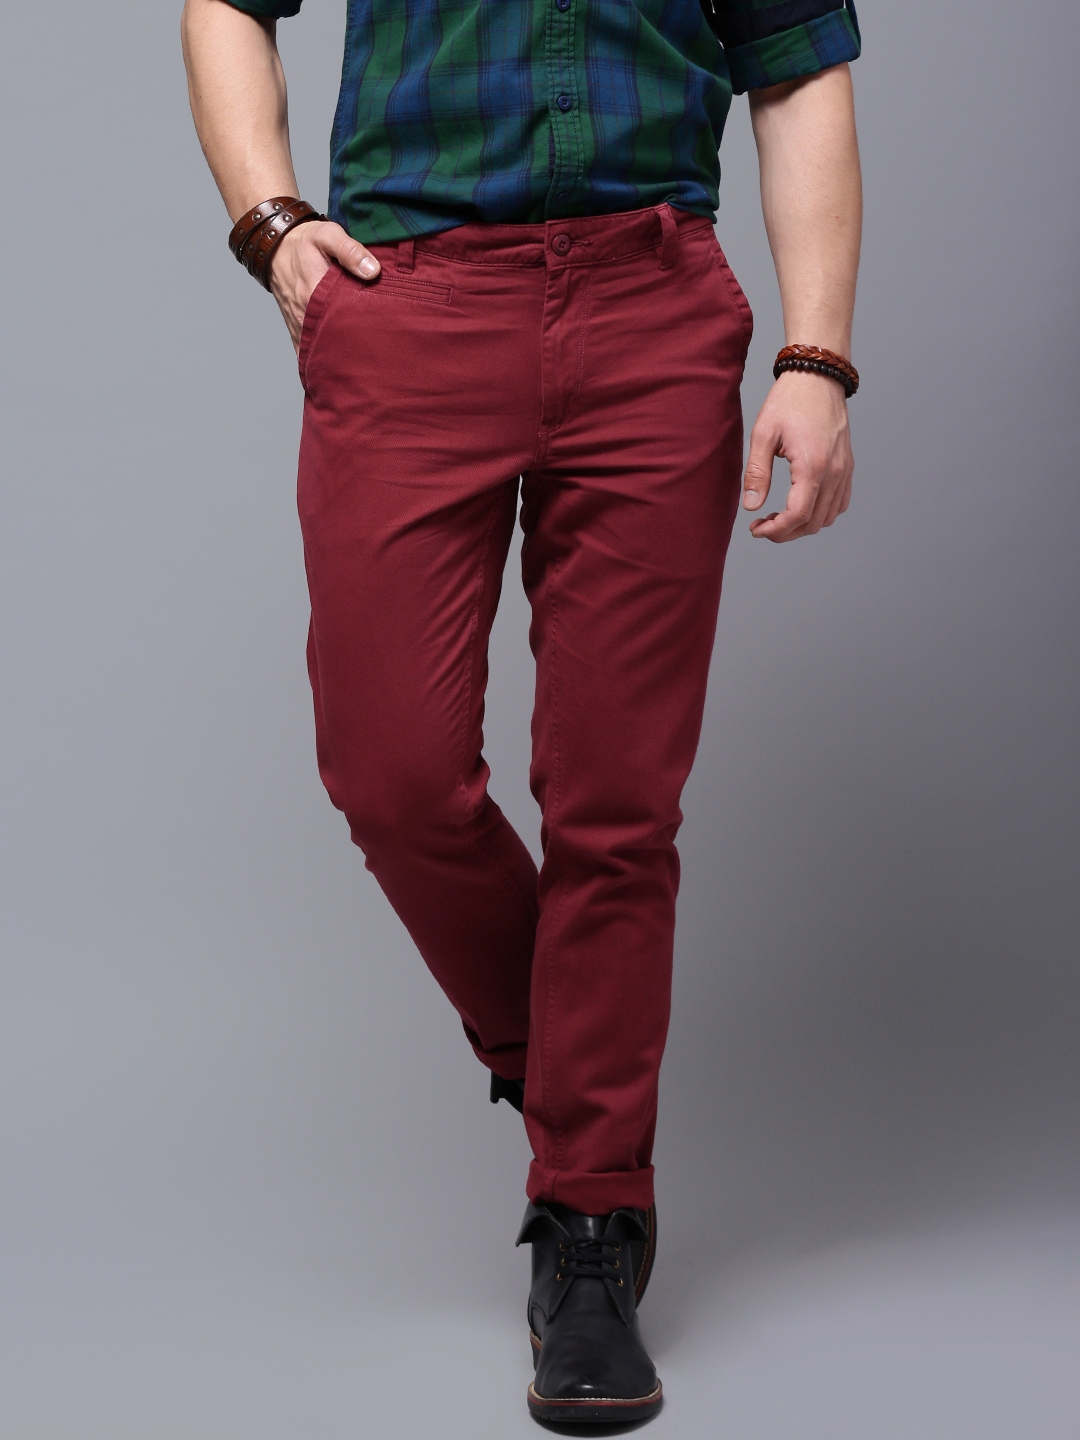 Buy Roadster Red Chino Trousers - Trousers for Men 558021 | Myntra